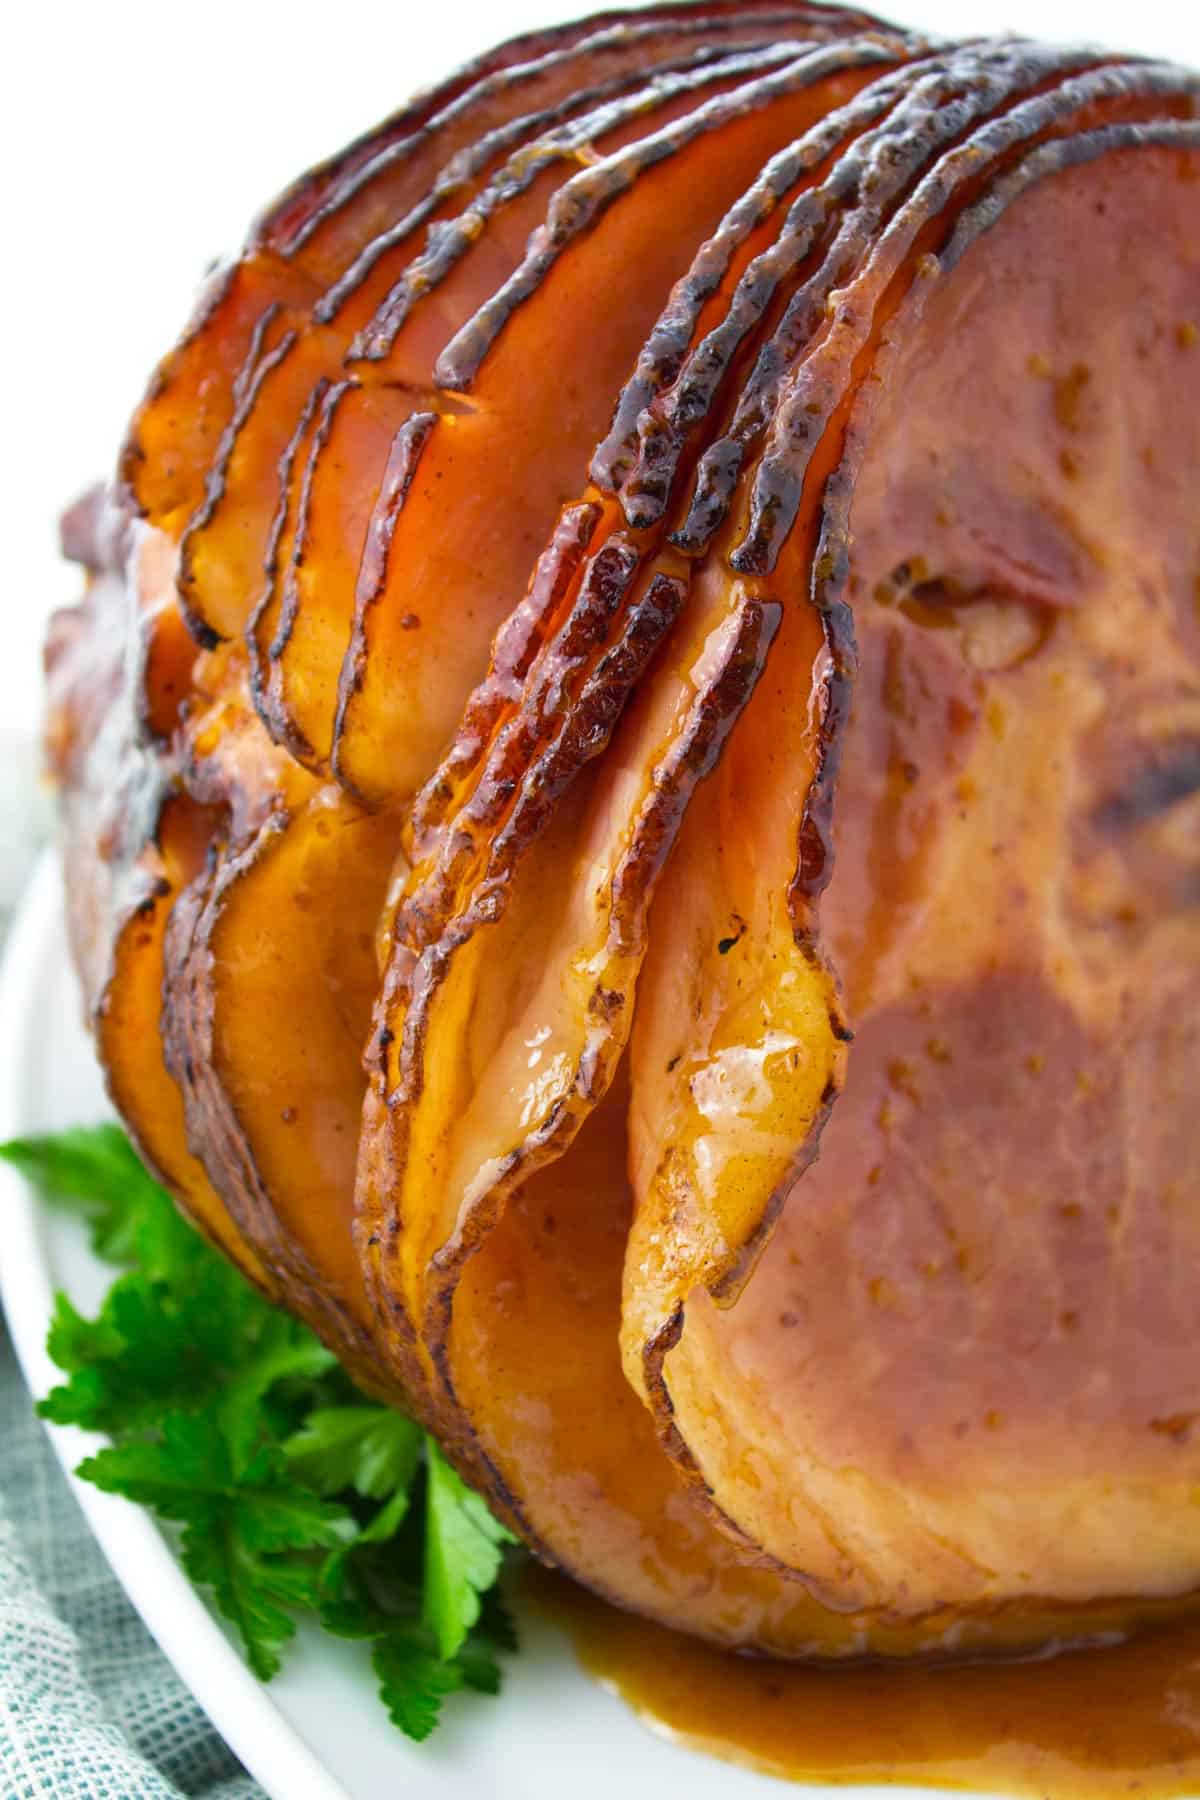 Spiral ham that's been cooked in a roaster and set on a platter.